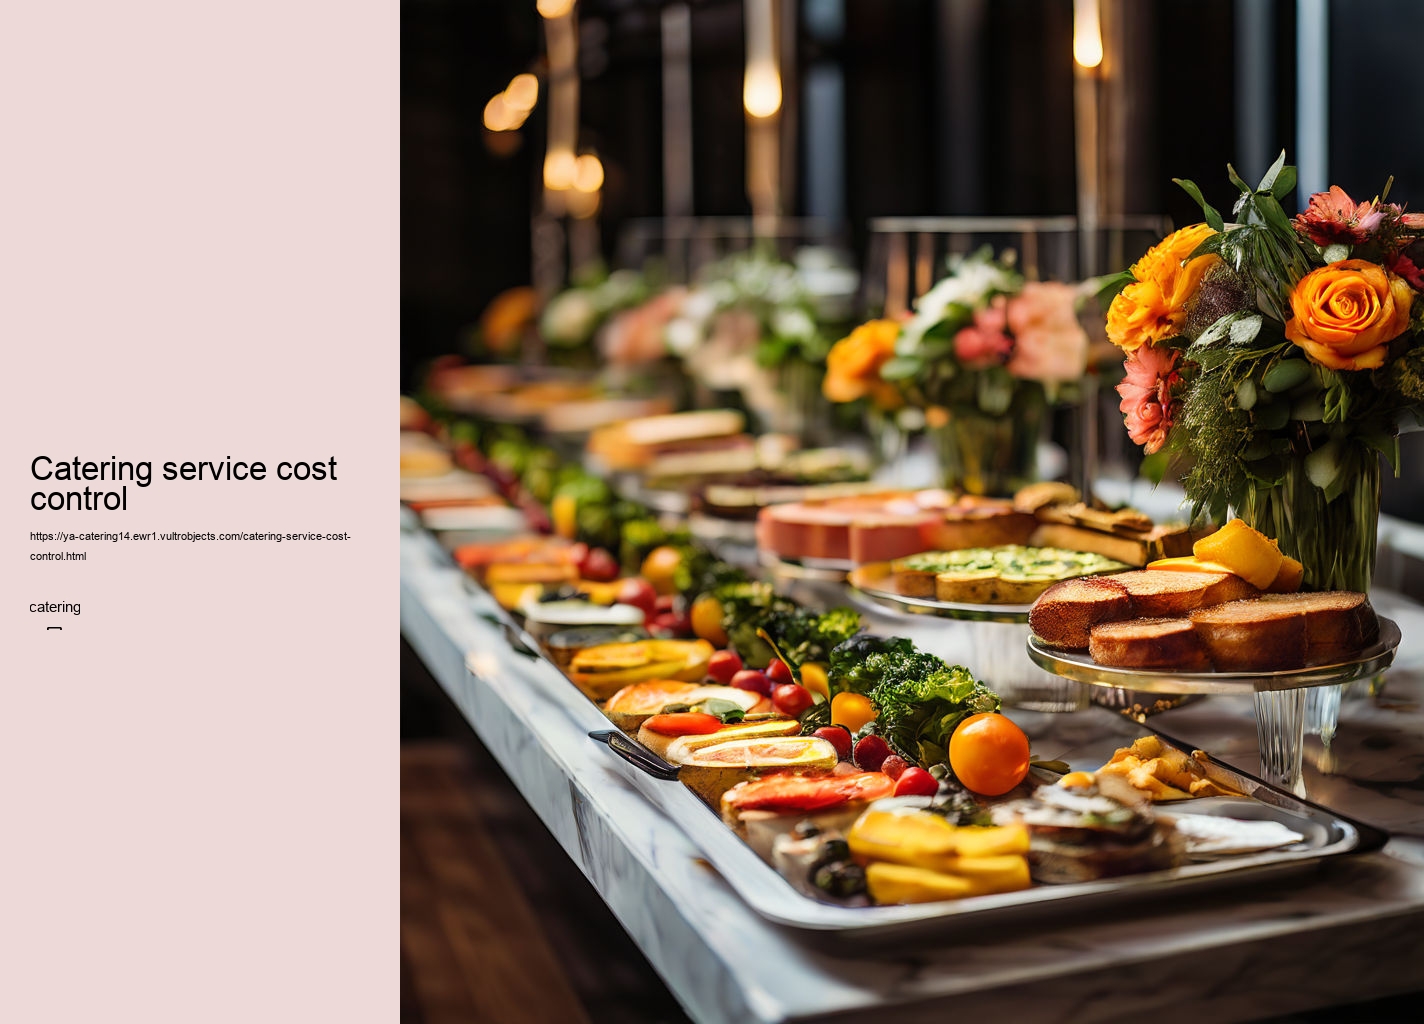 Catering service cost control